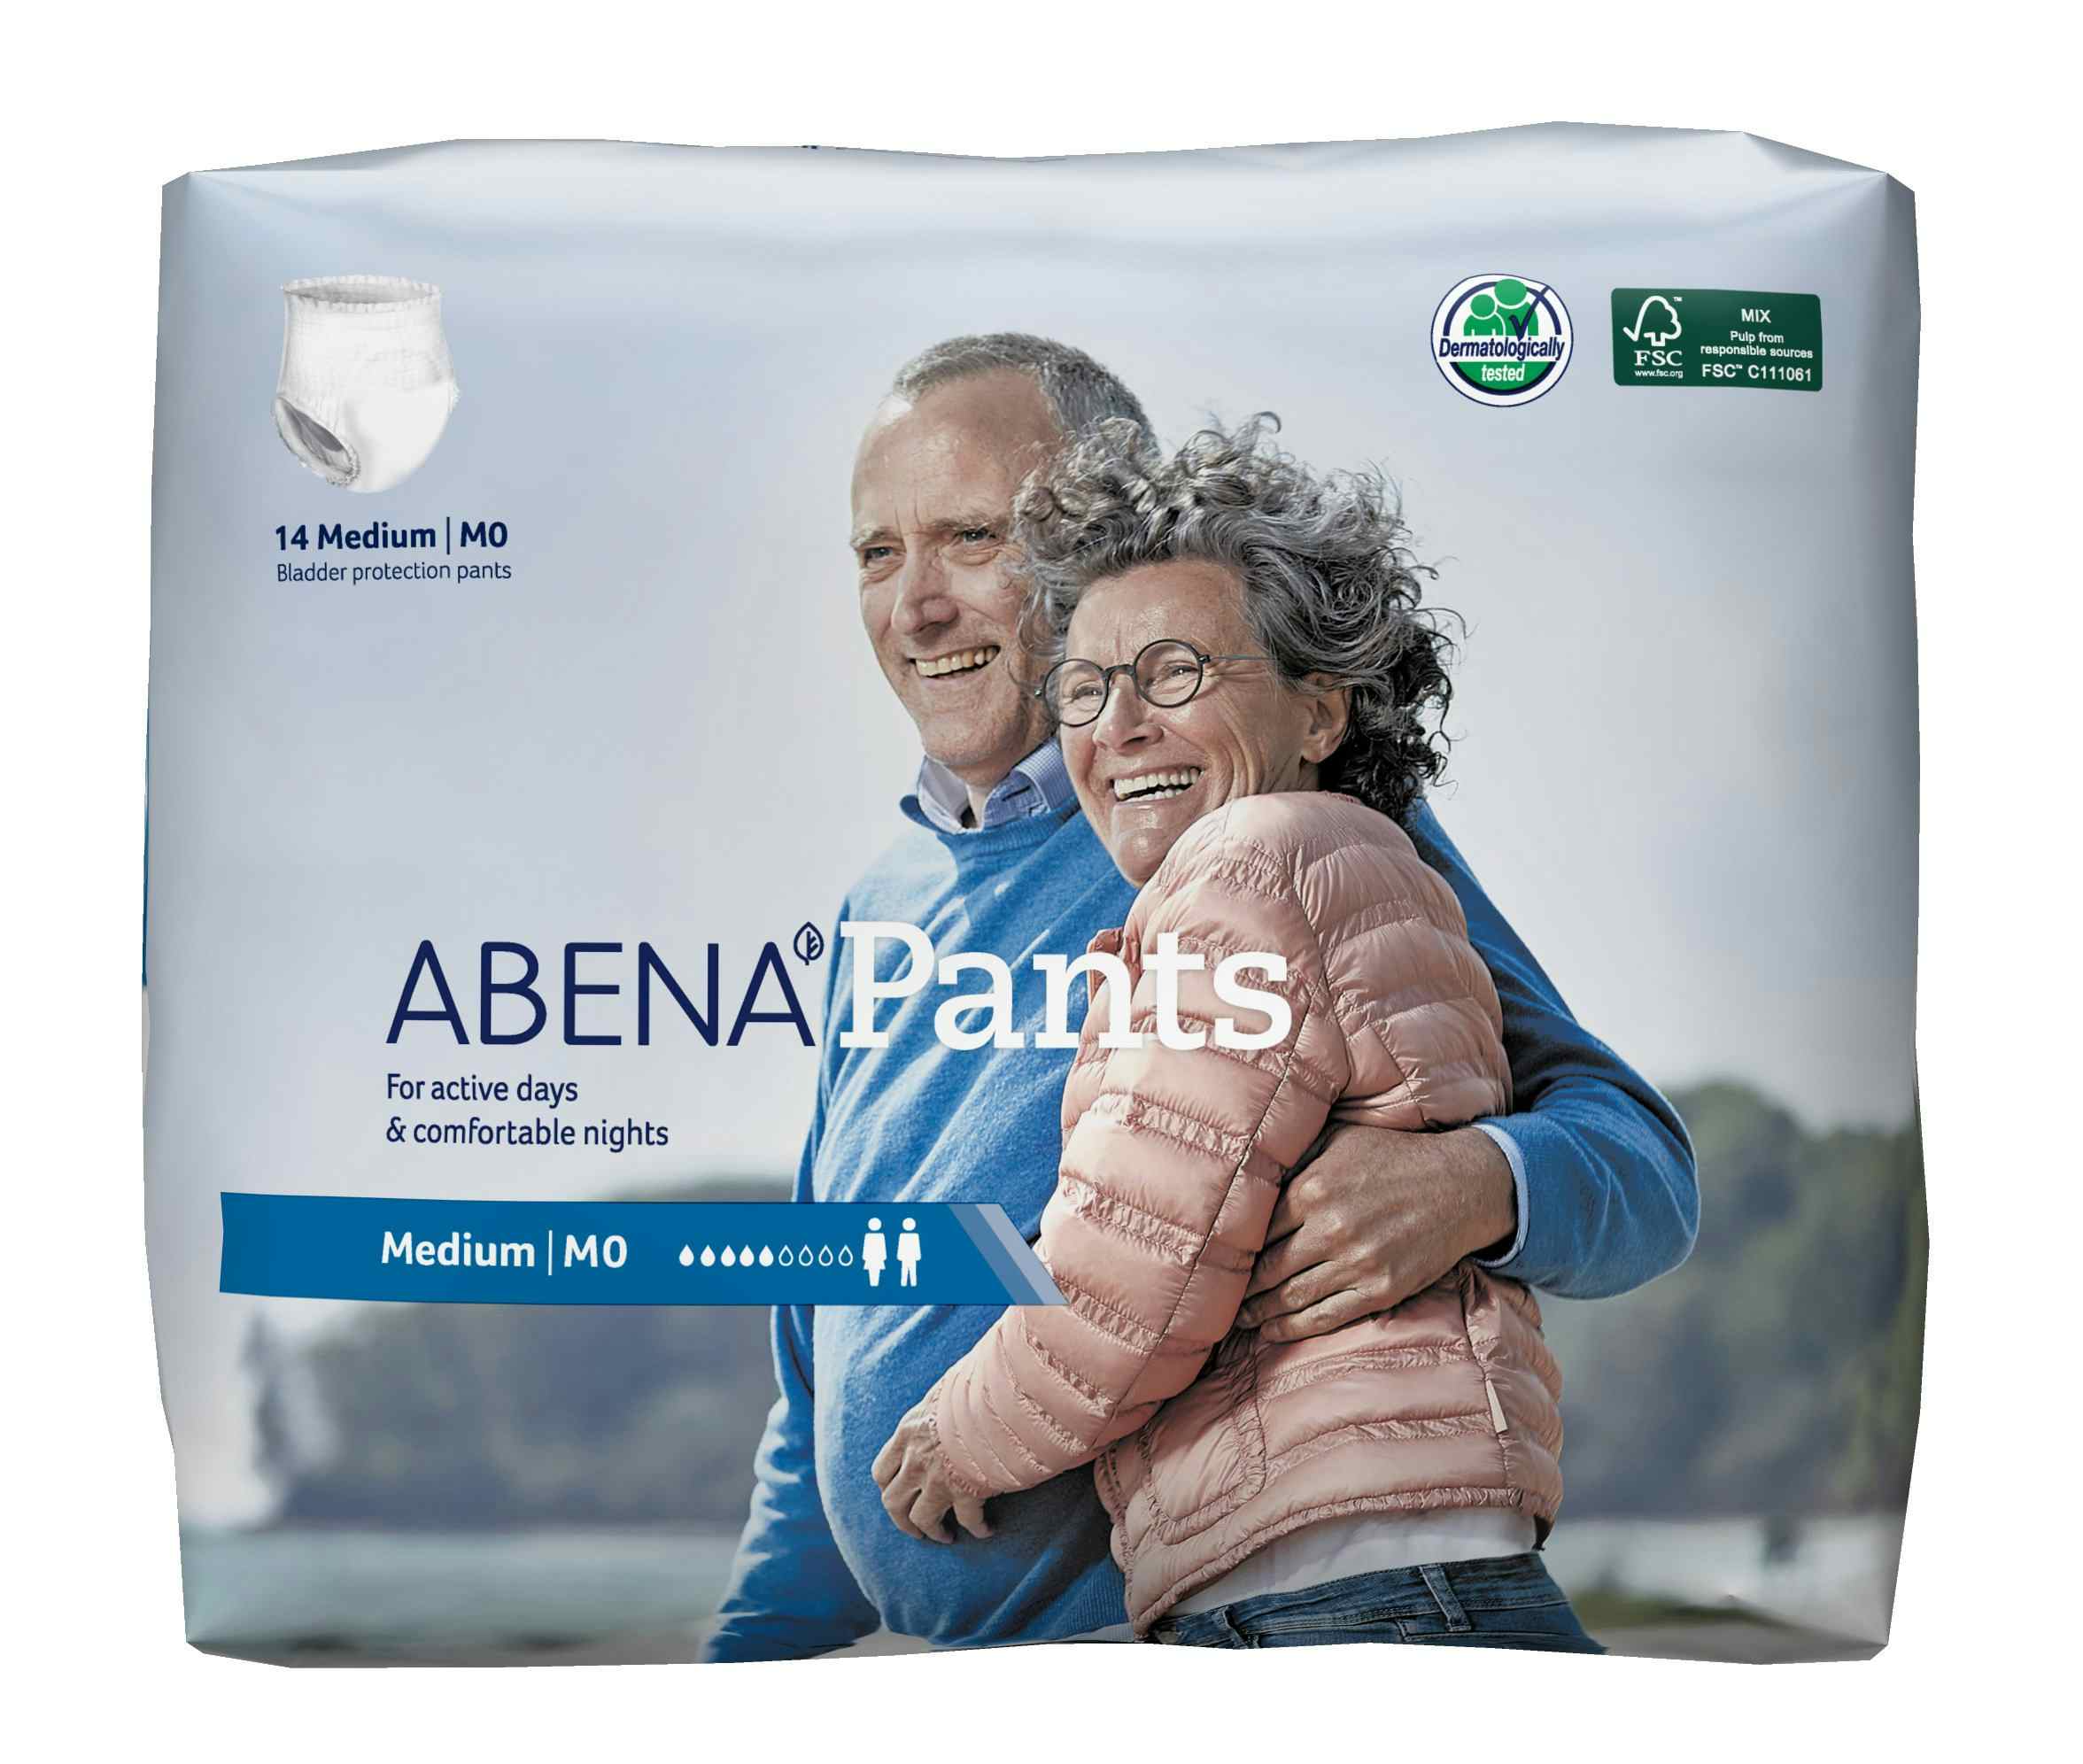 Abena Unisex Disposable Pull On Adult Diaper with Tear Away Seams, Moderate Absorbency, 1000017173, Medium (31-43") - Bag of 14